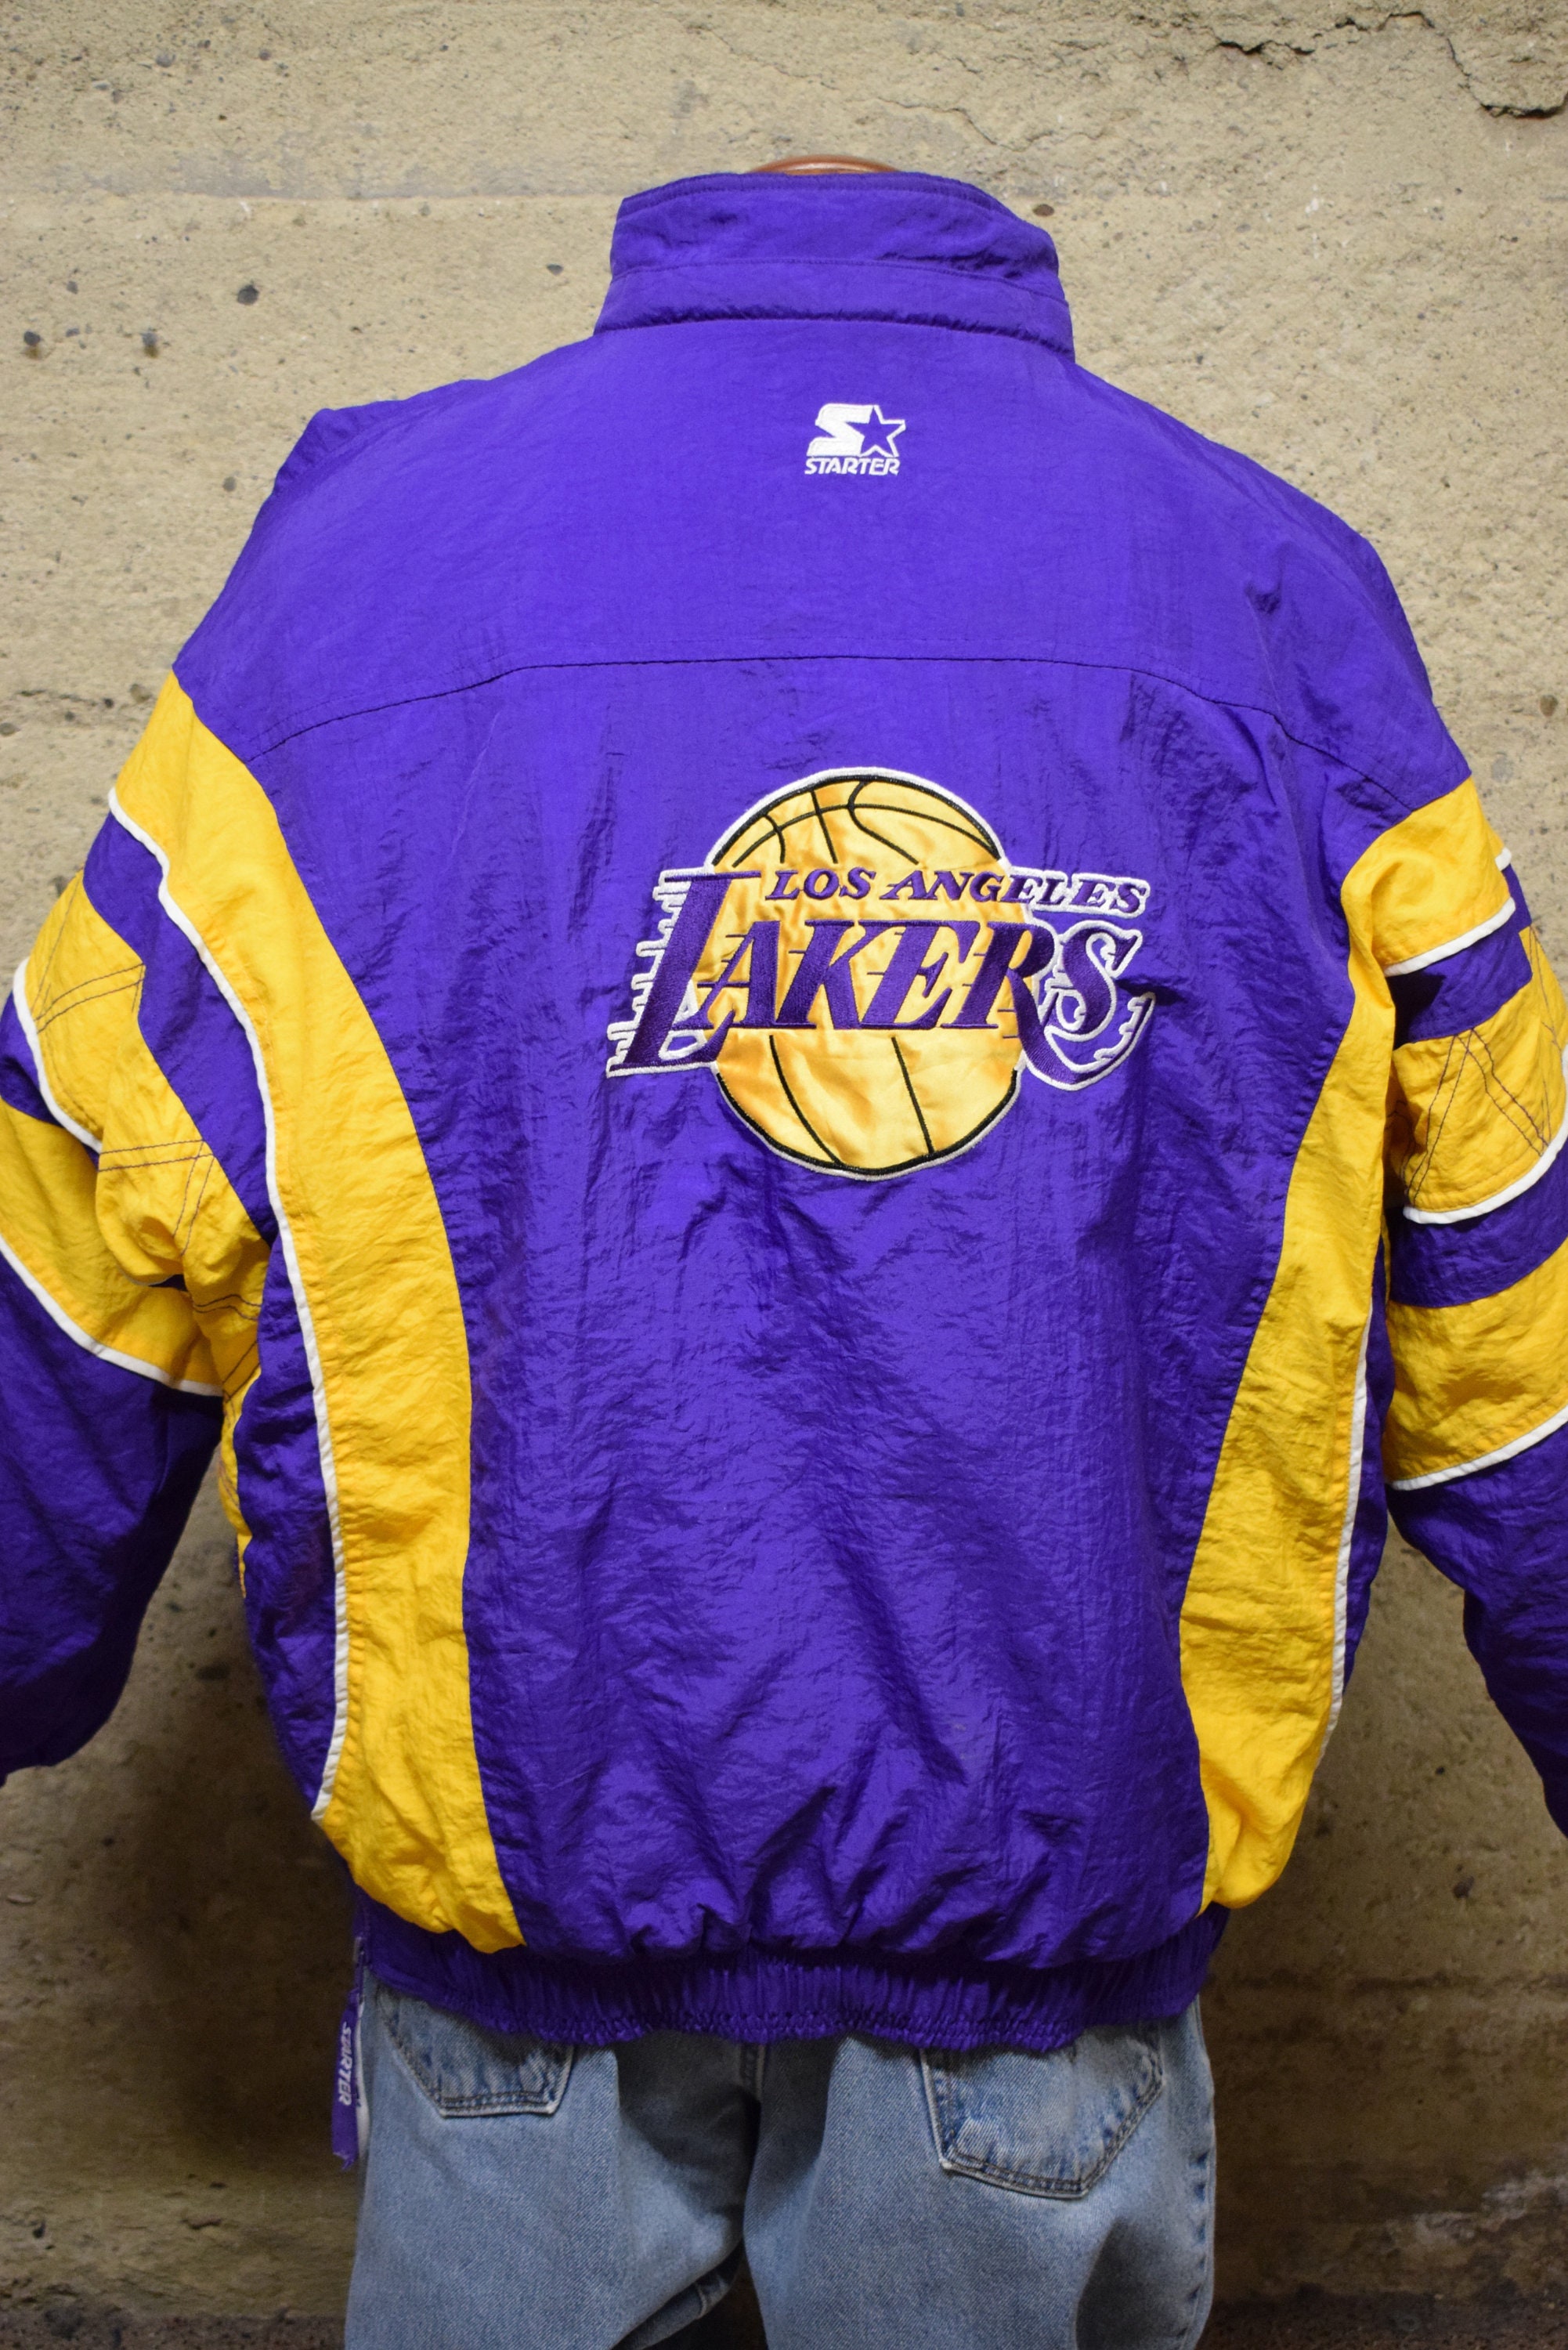 STARTER, Other, Los Angeles Lakers Hockey Jersey By Starter Nba